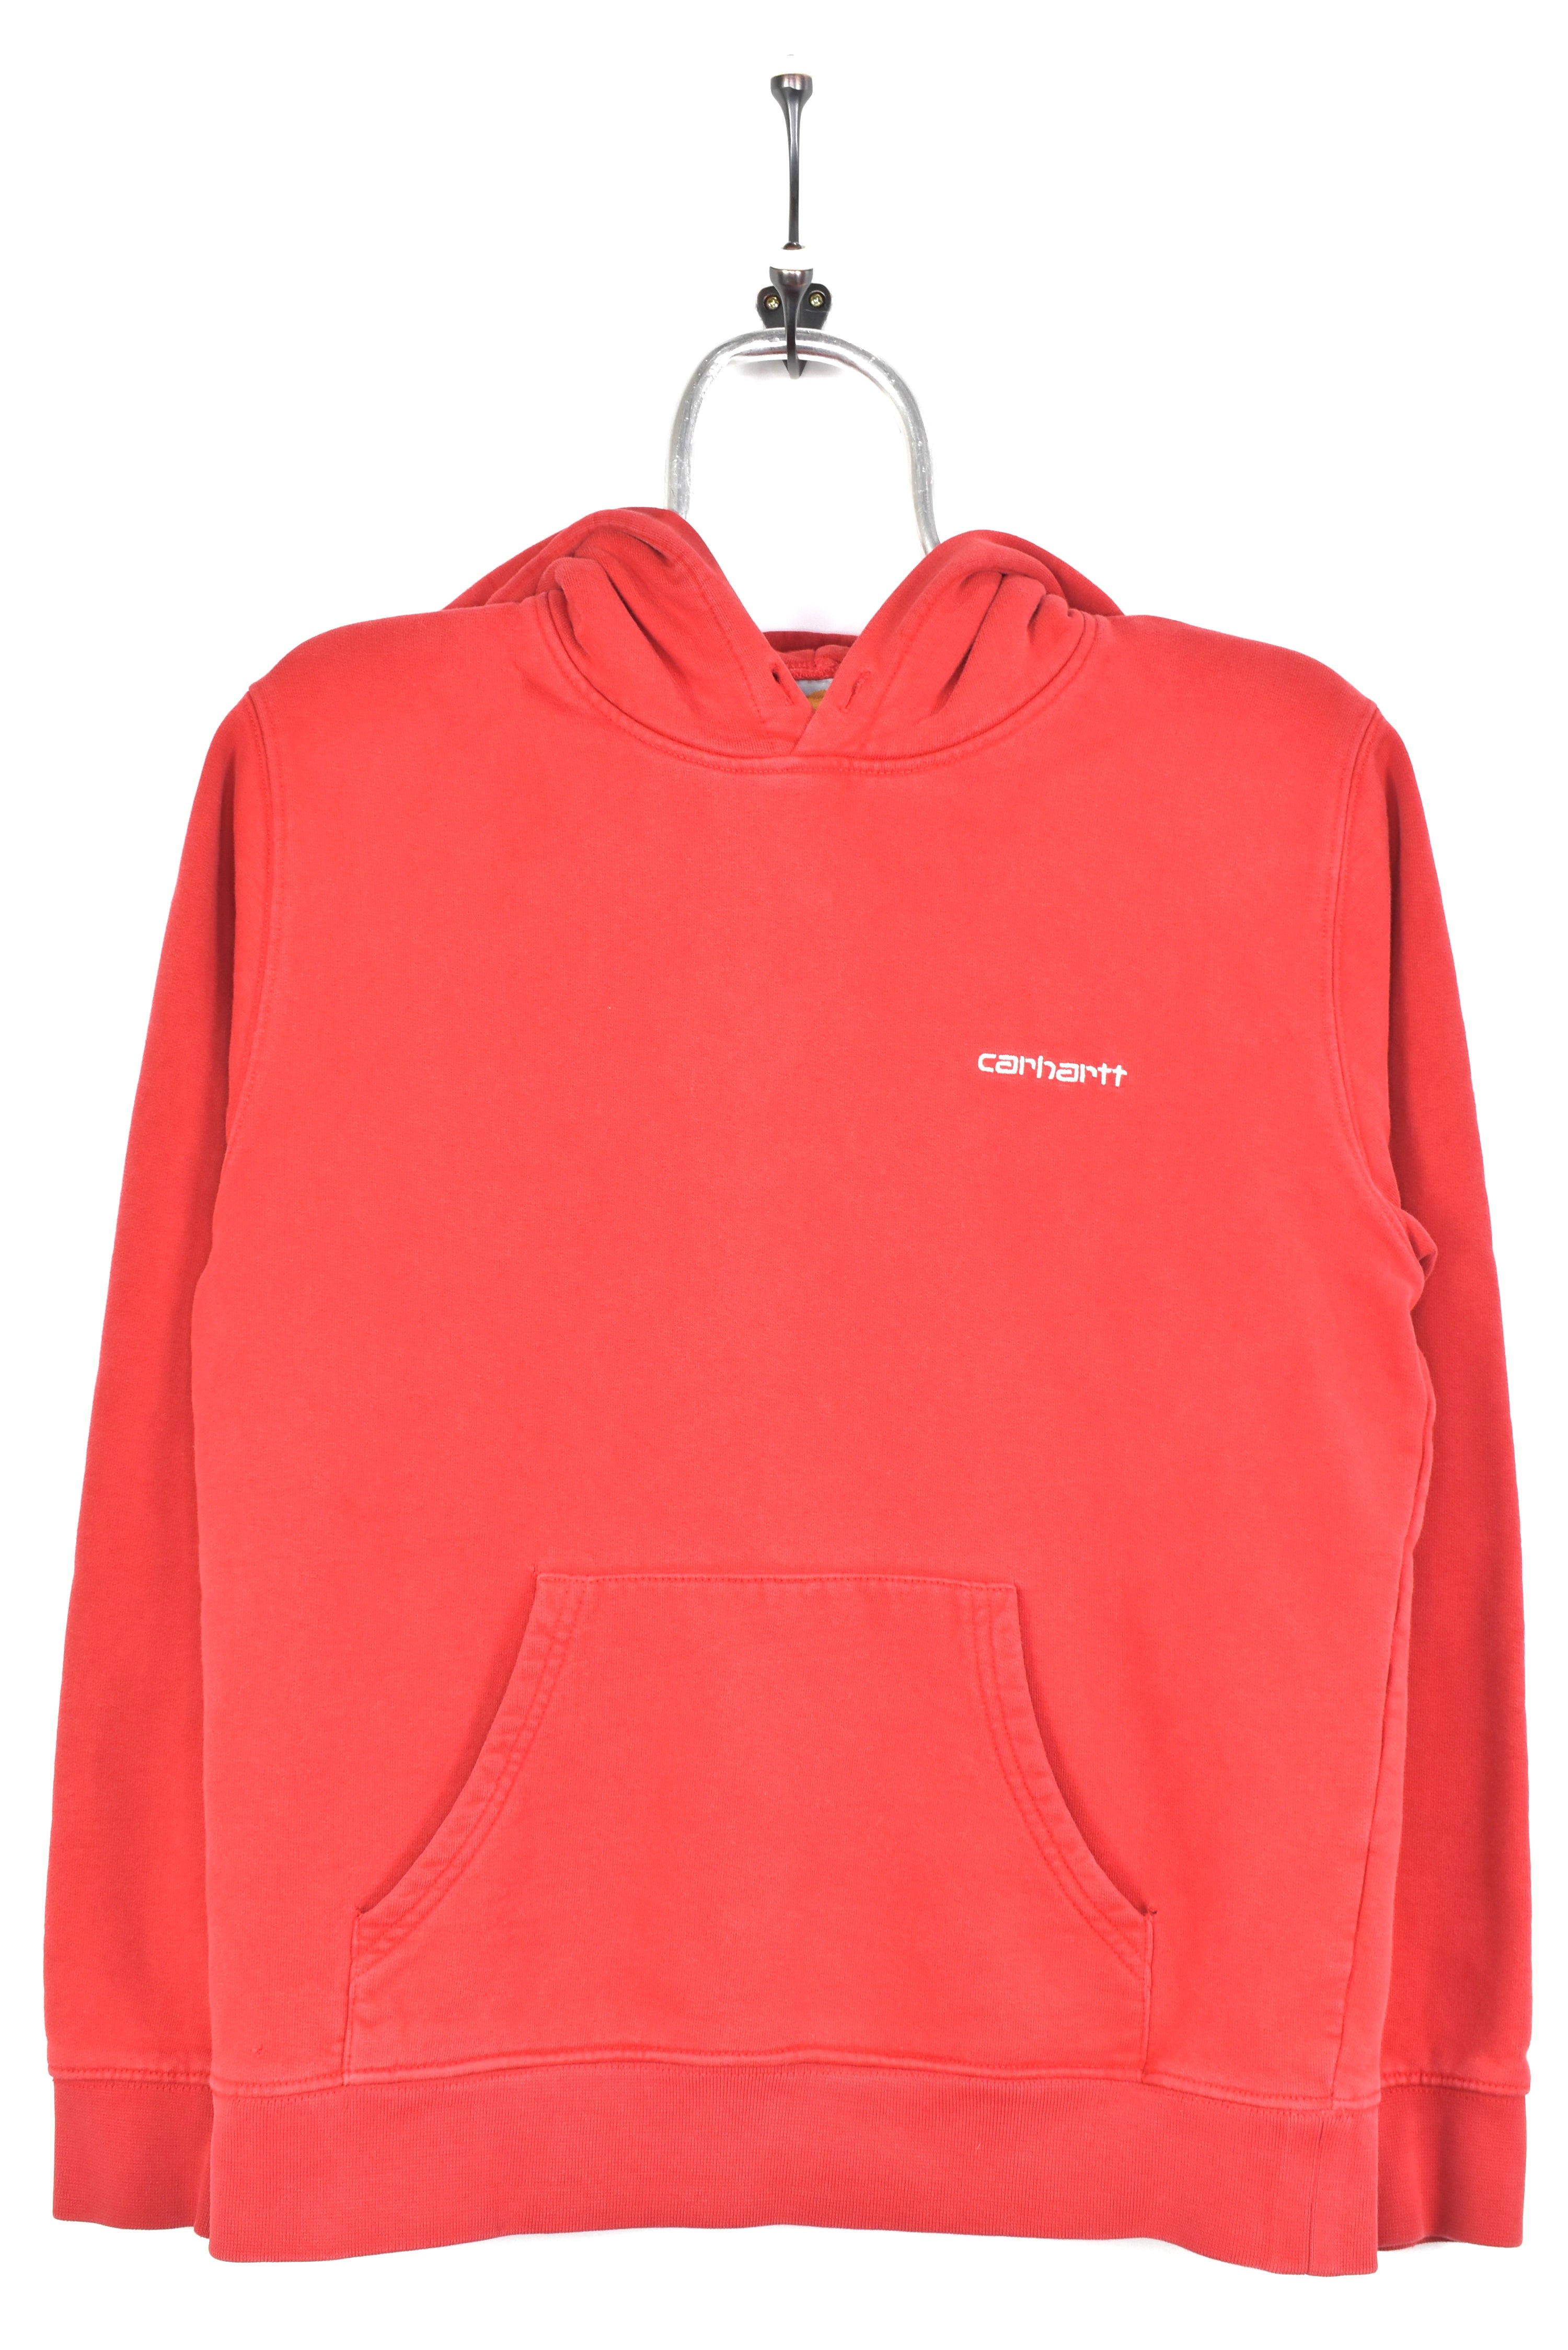 VINTAGE CARHARTT EMBROIDERED RED HOODIE | SMALL CARHARTT